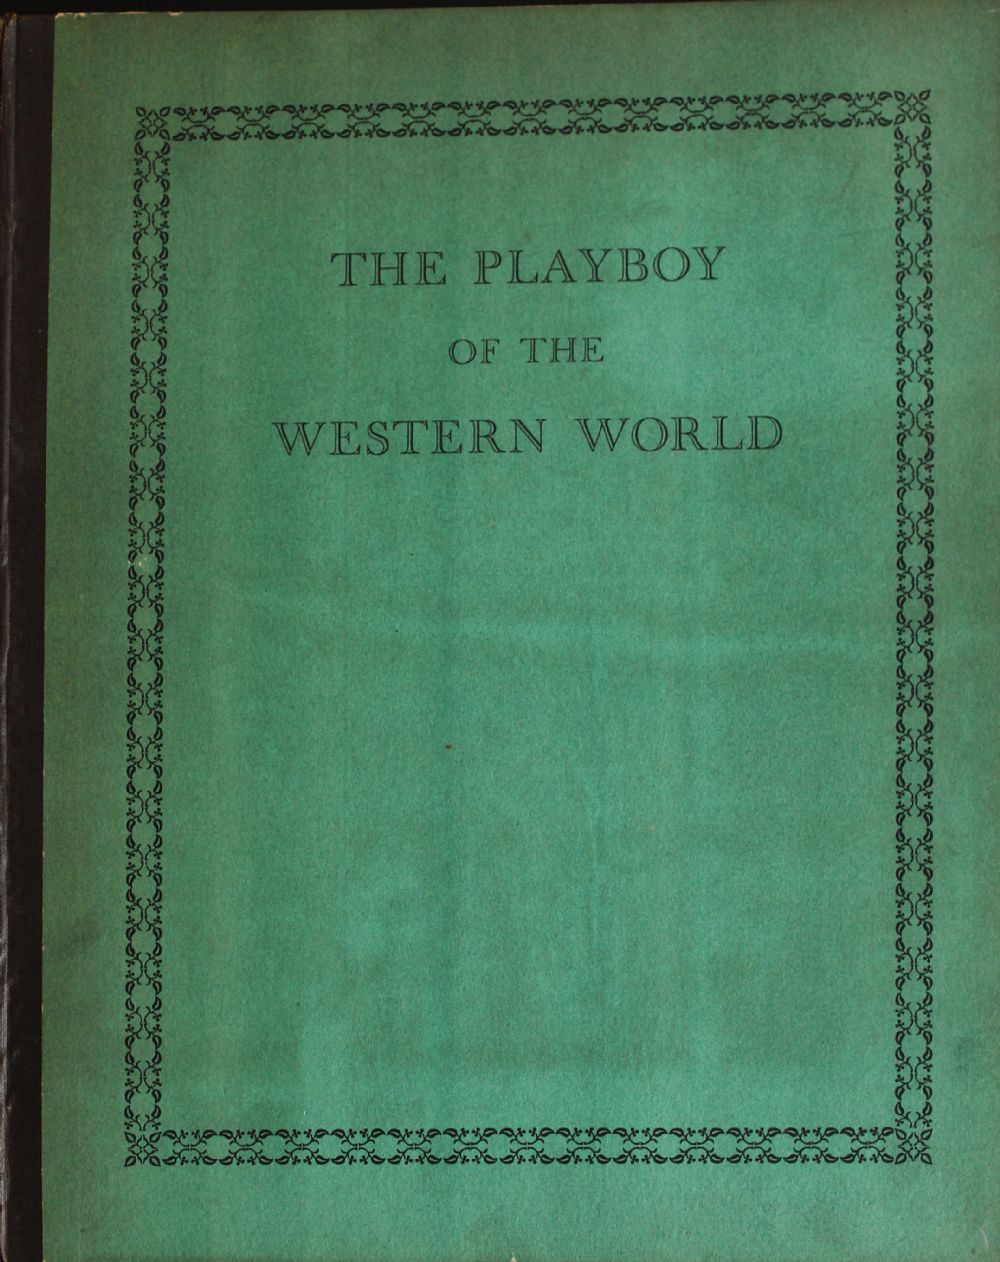 THE PLAYBOY OF THE WESTERN WORLD